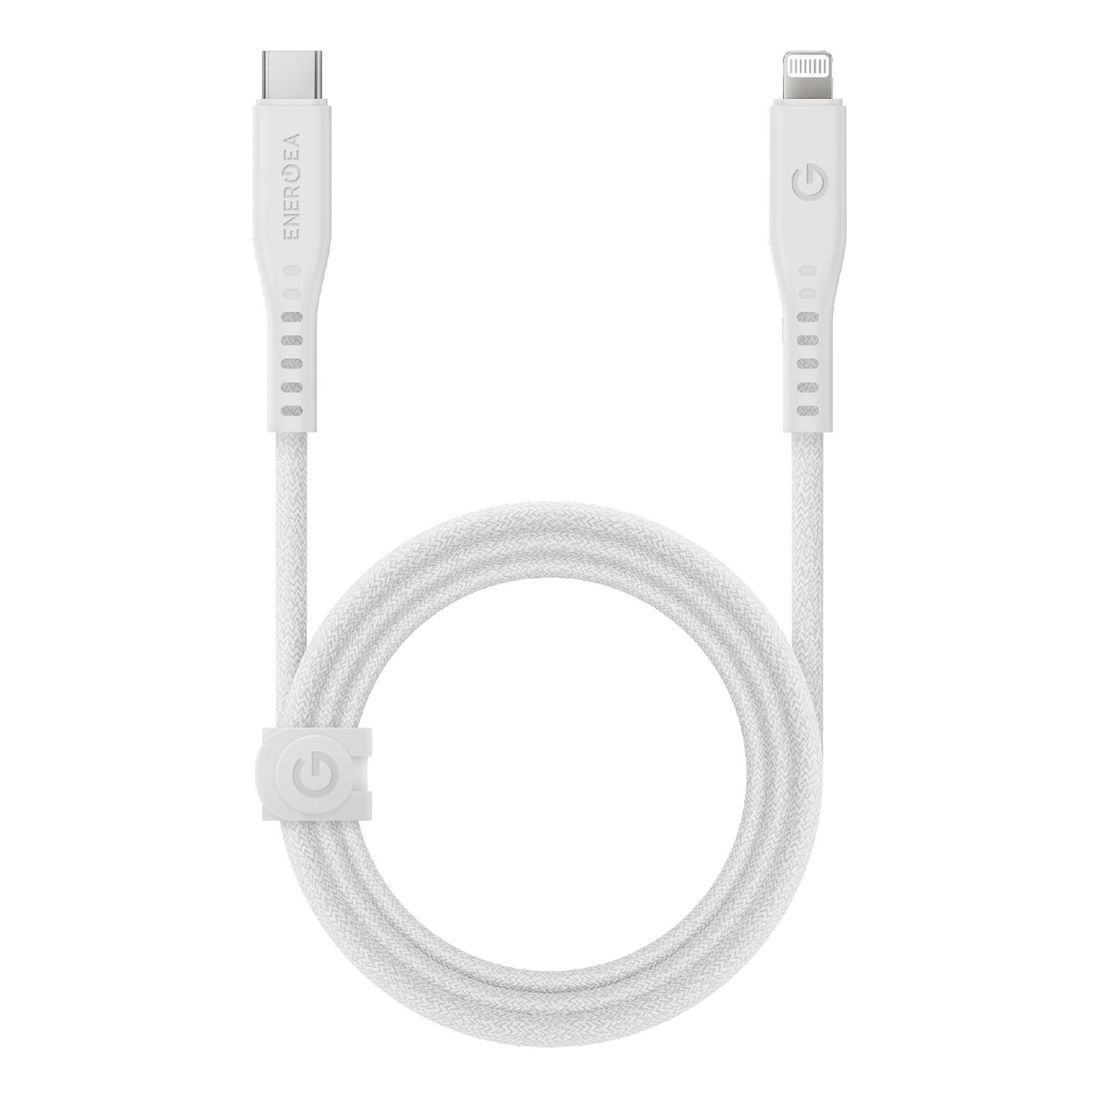 Energea Flow Lightning to USB-C Cable 1.5m - White